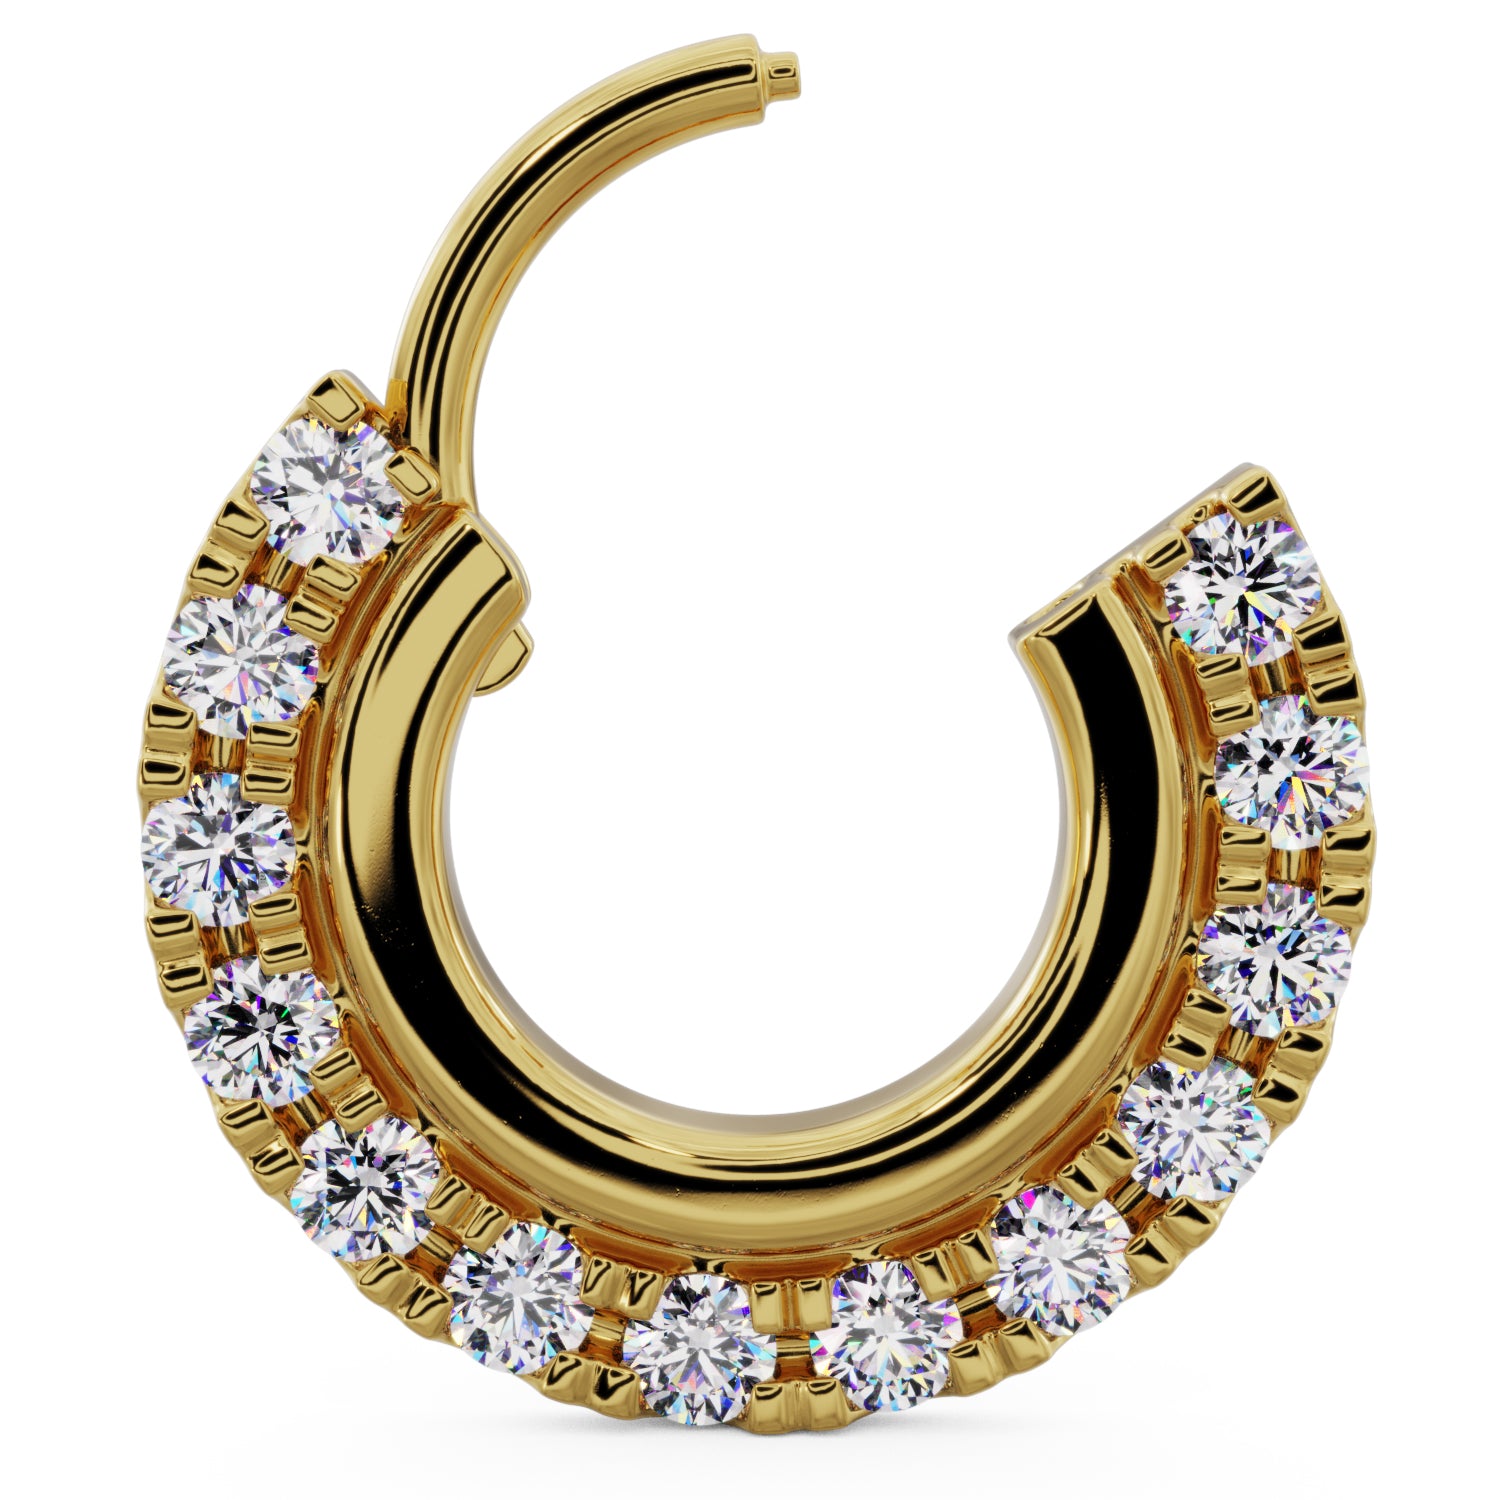 Open Clicker Gold Band and Diamonds Clicker 14k Gold Clicker Ring Hoop